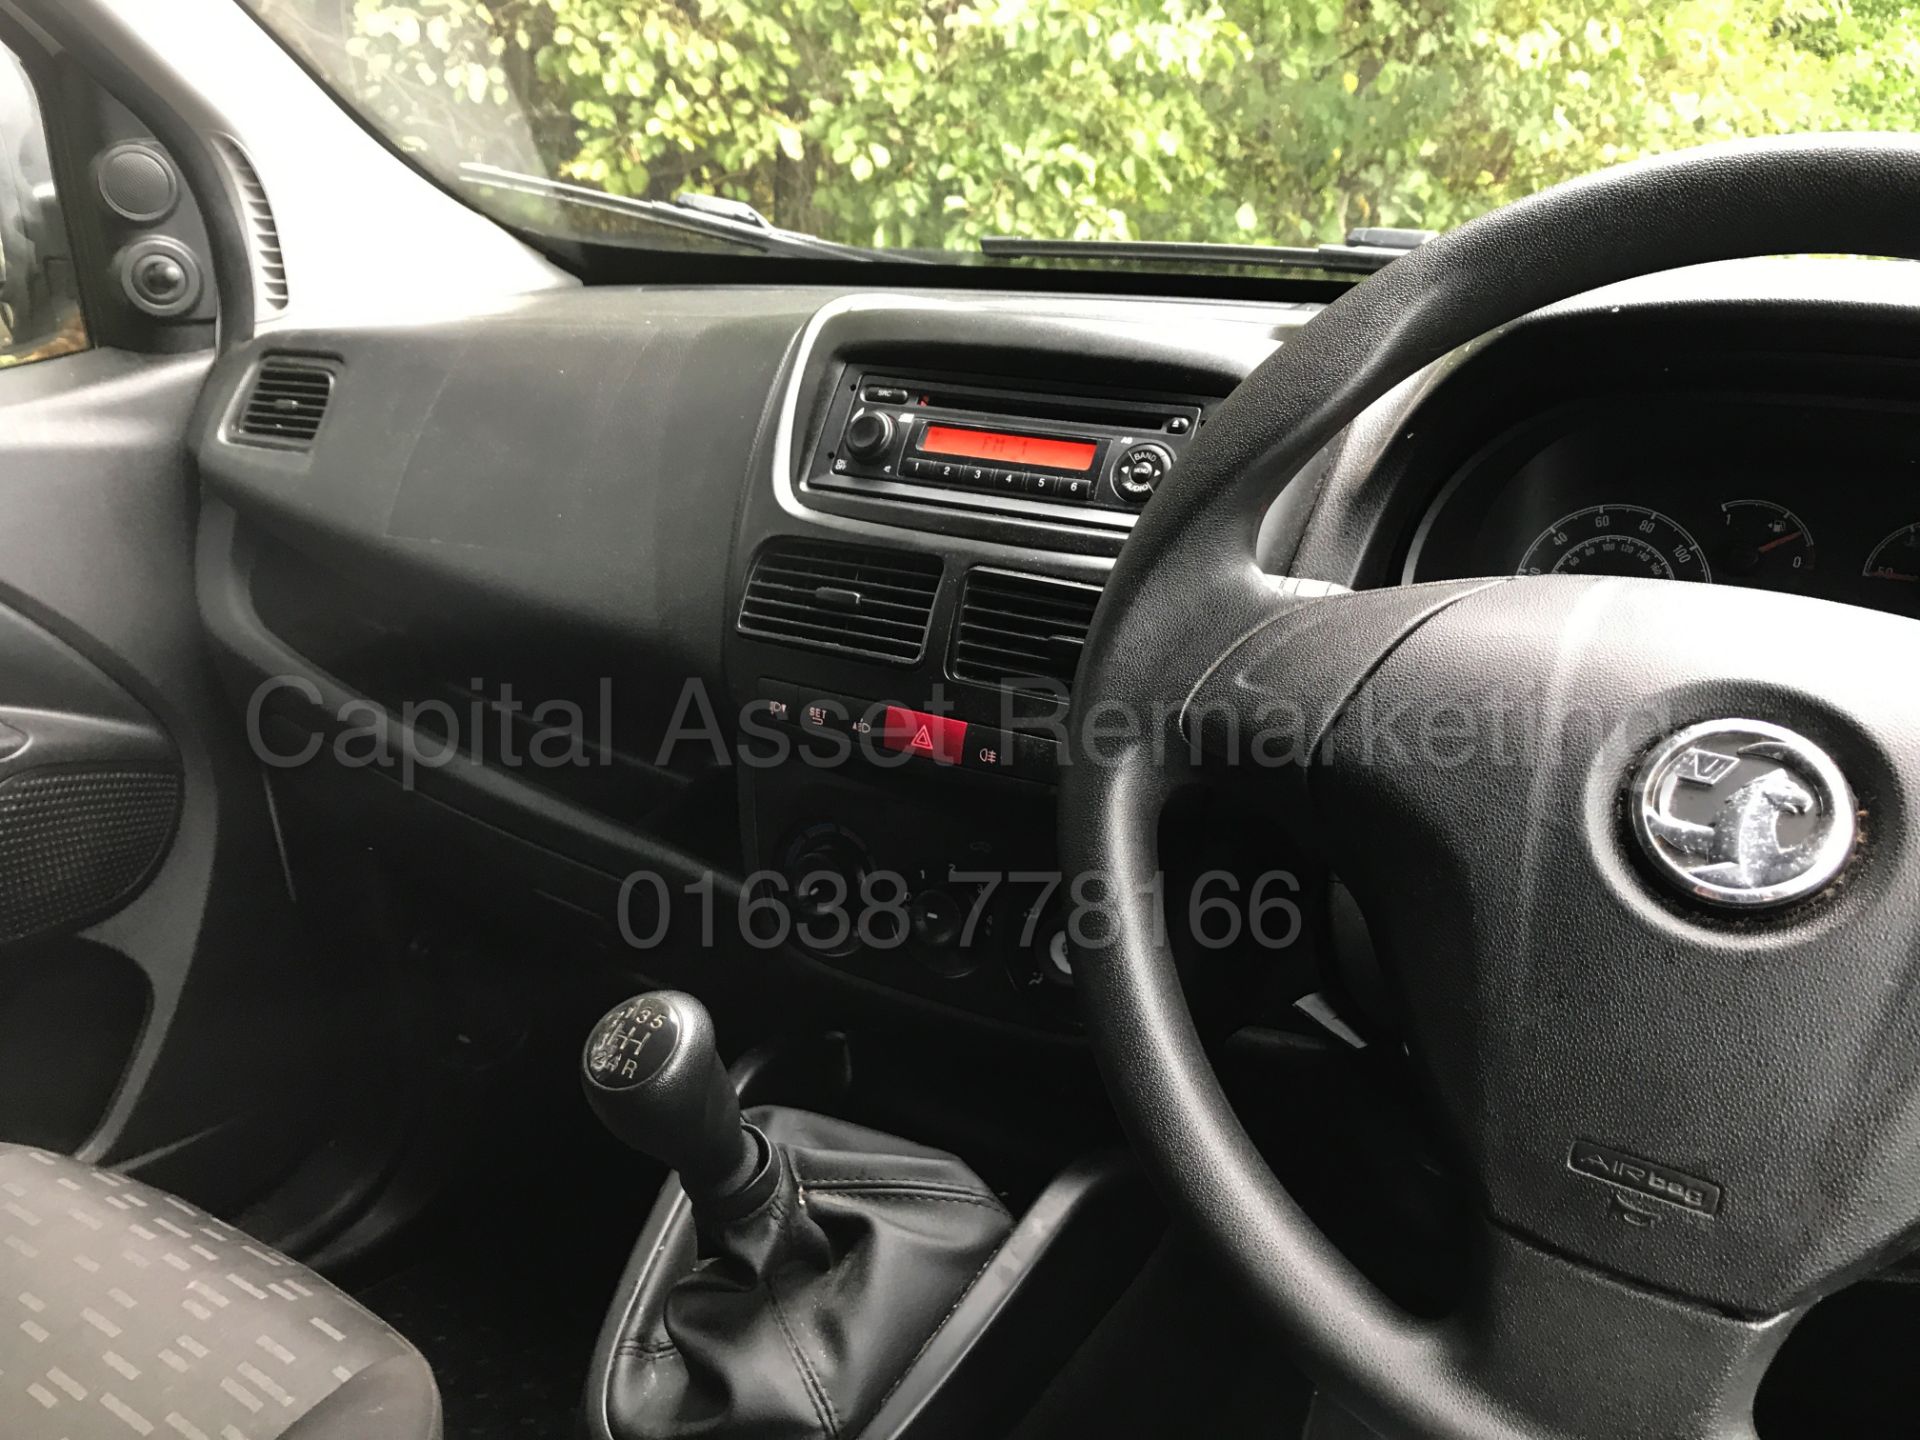 VAUXHALL COMBO 2000 L1H1 (2015 MODEL) 'CDTI - 90 BHP' (1 FORMER COMPANY OWNER FROM NEW) *50 MPG+* - Image 19 of 25